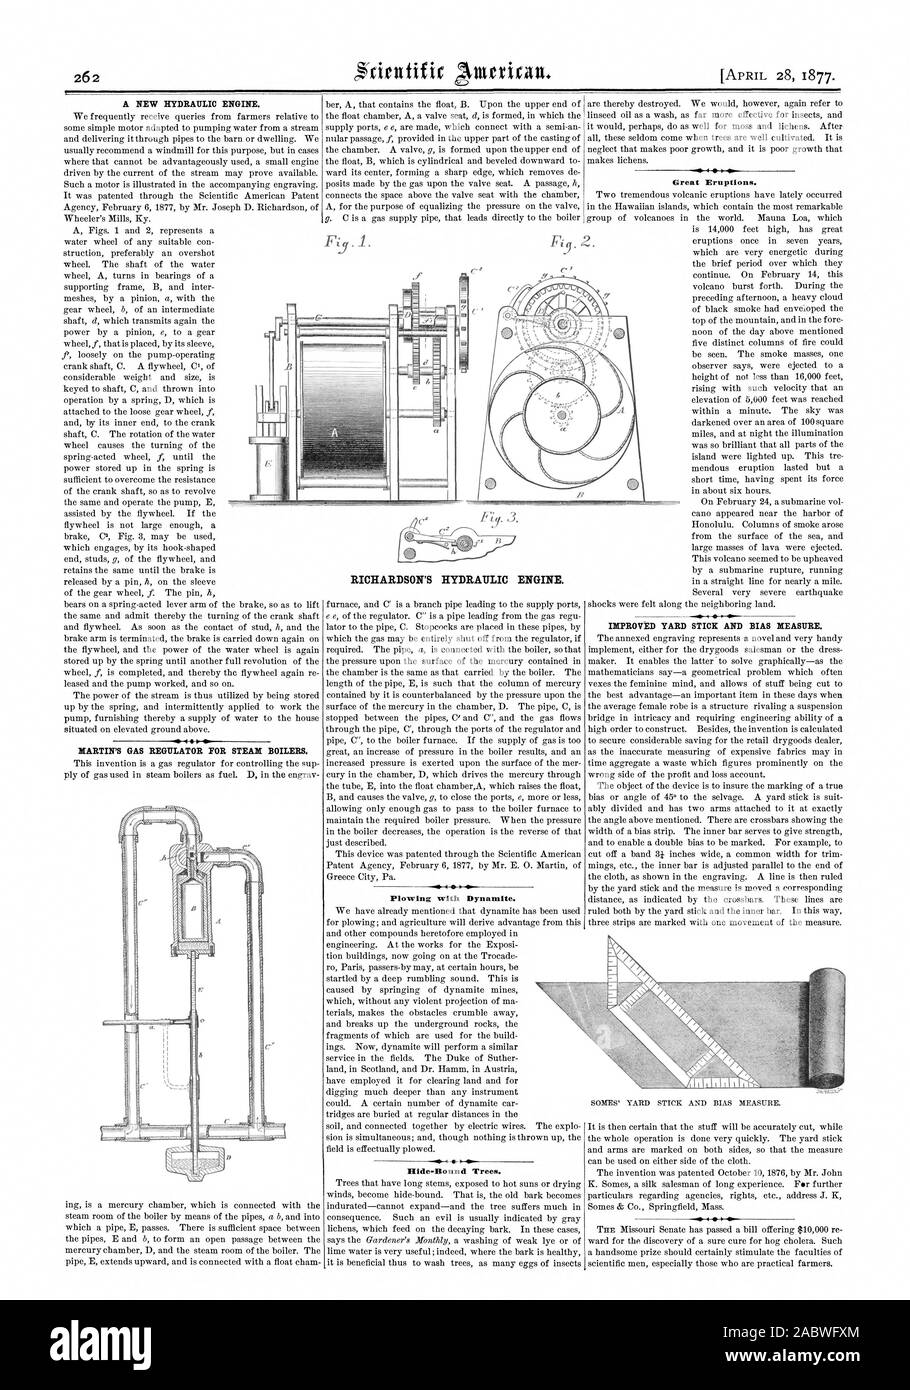 A NEW HYDRAULIC ENGINE. MARTIN'S GAS REGULATOR FOR STEAM BOILERS. Plowing with Dynamite. Hide-Bound Trees. 4 Great Eruptions. IMPROVED YARD STICK AND BIAS MEASURE. RICHARDSON'S HYDRAULIC ENGINE. SOMES' YARD STICK AND BIAS MEASURE., scientific american, 1877-04-28 Stock Photo